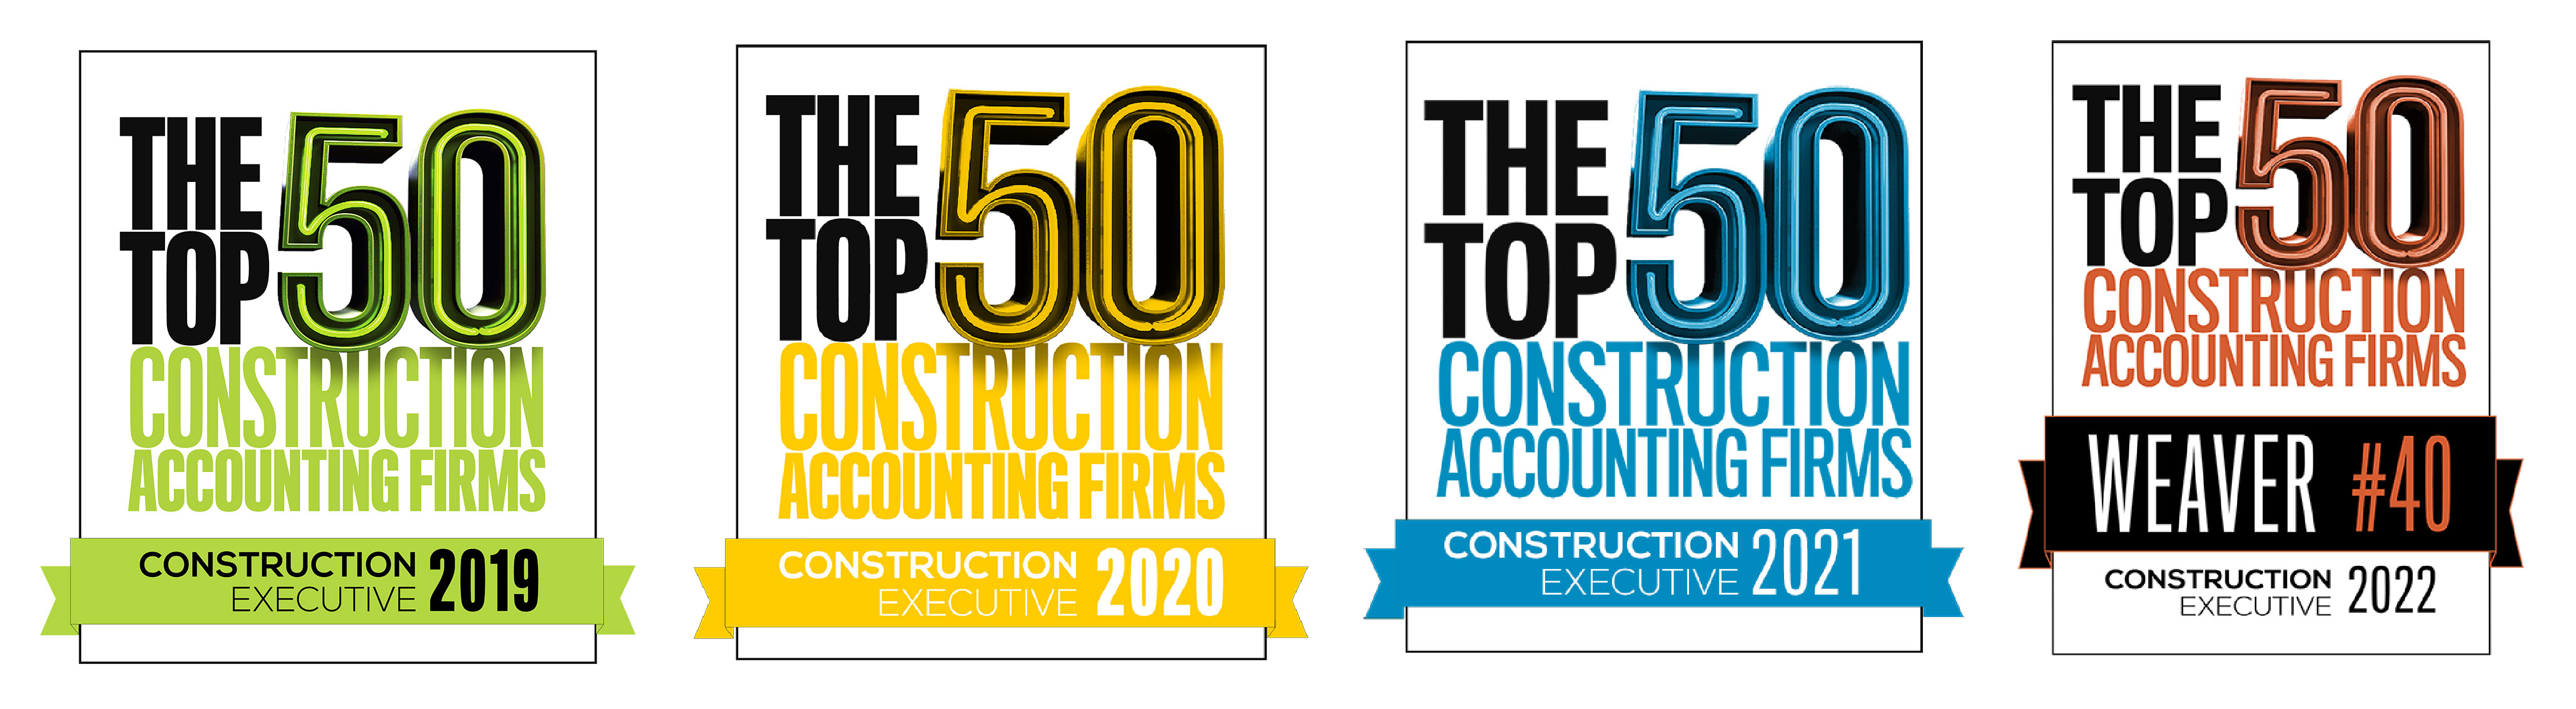 CE Top 50 Construction Accounting Firms (2019-2022)